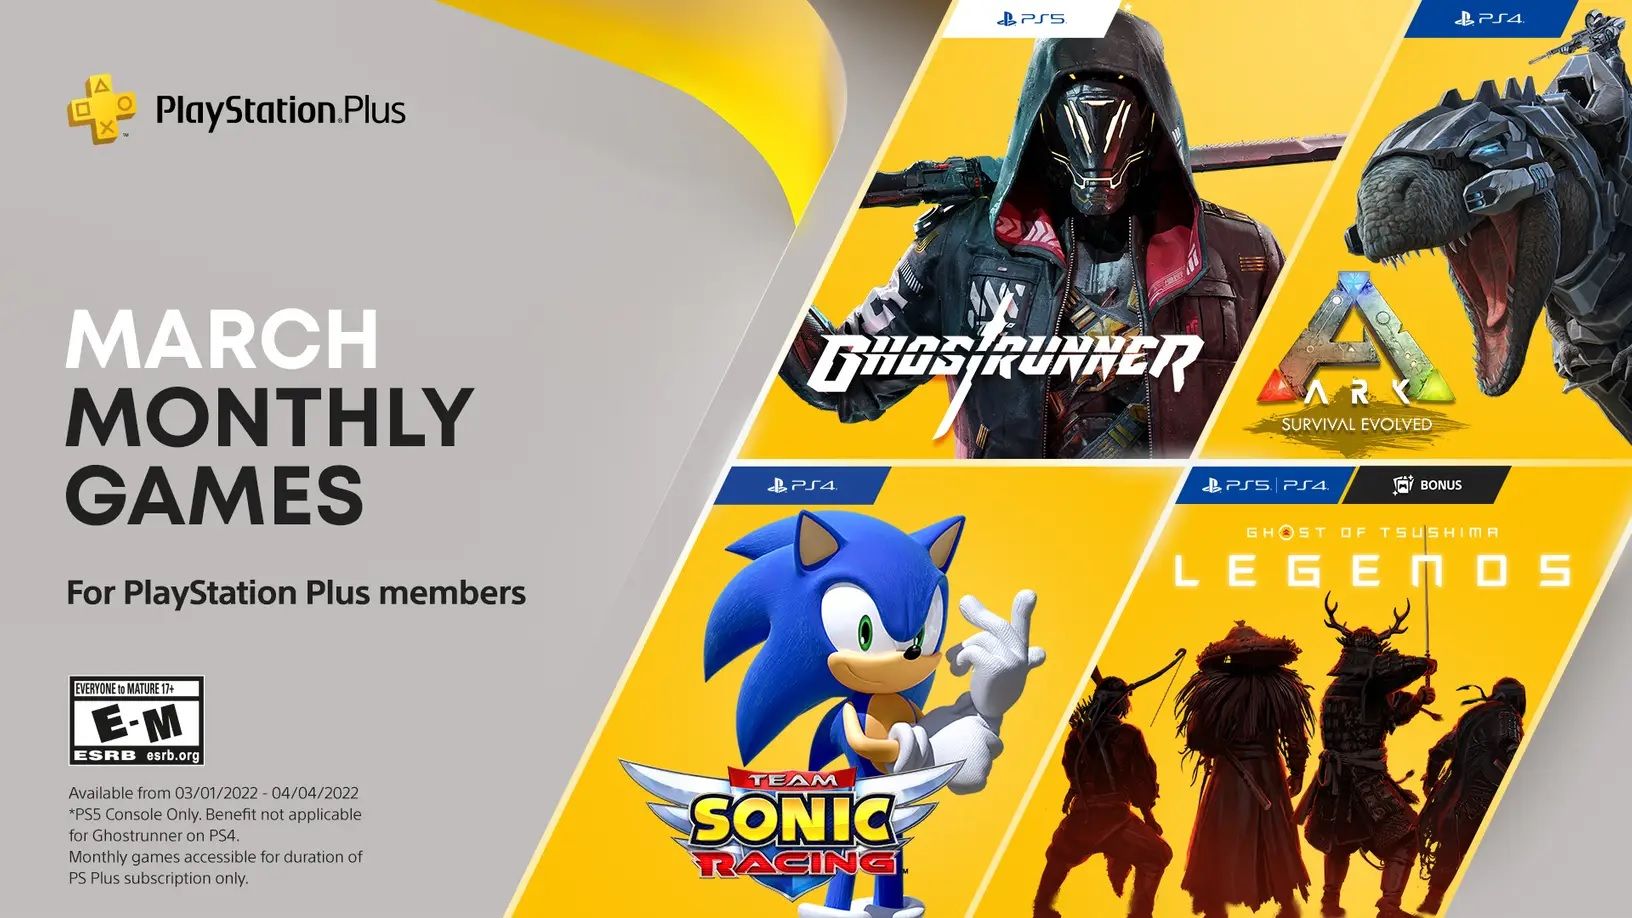 Free PS Plus Games for March 2022 Revealed, Includes 4 Games